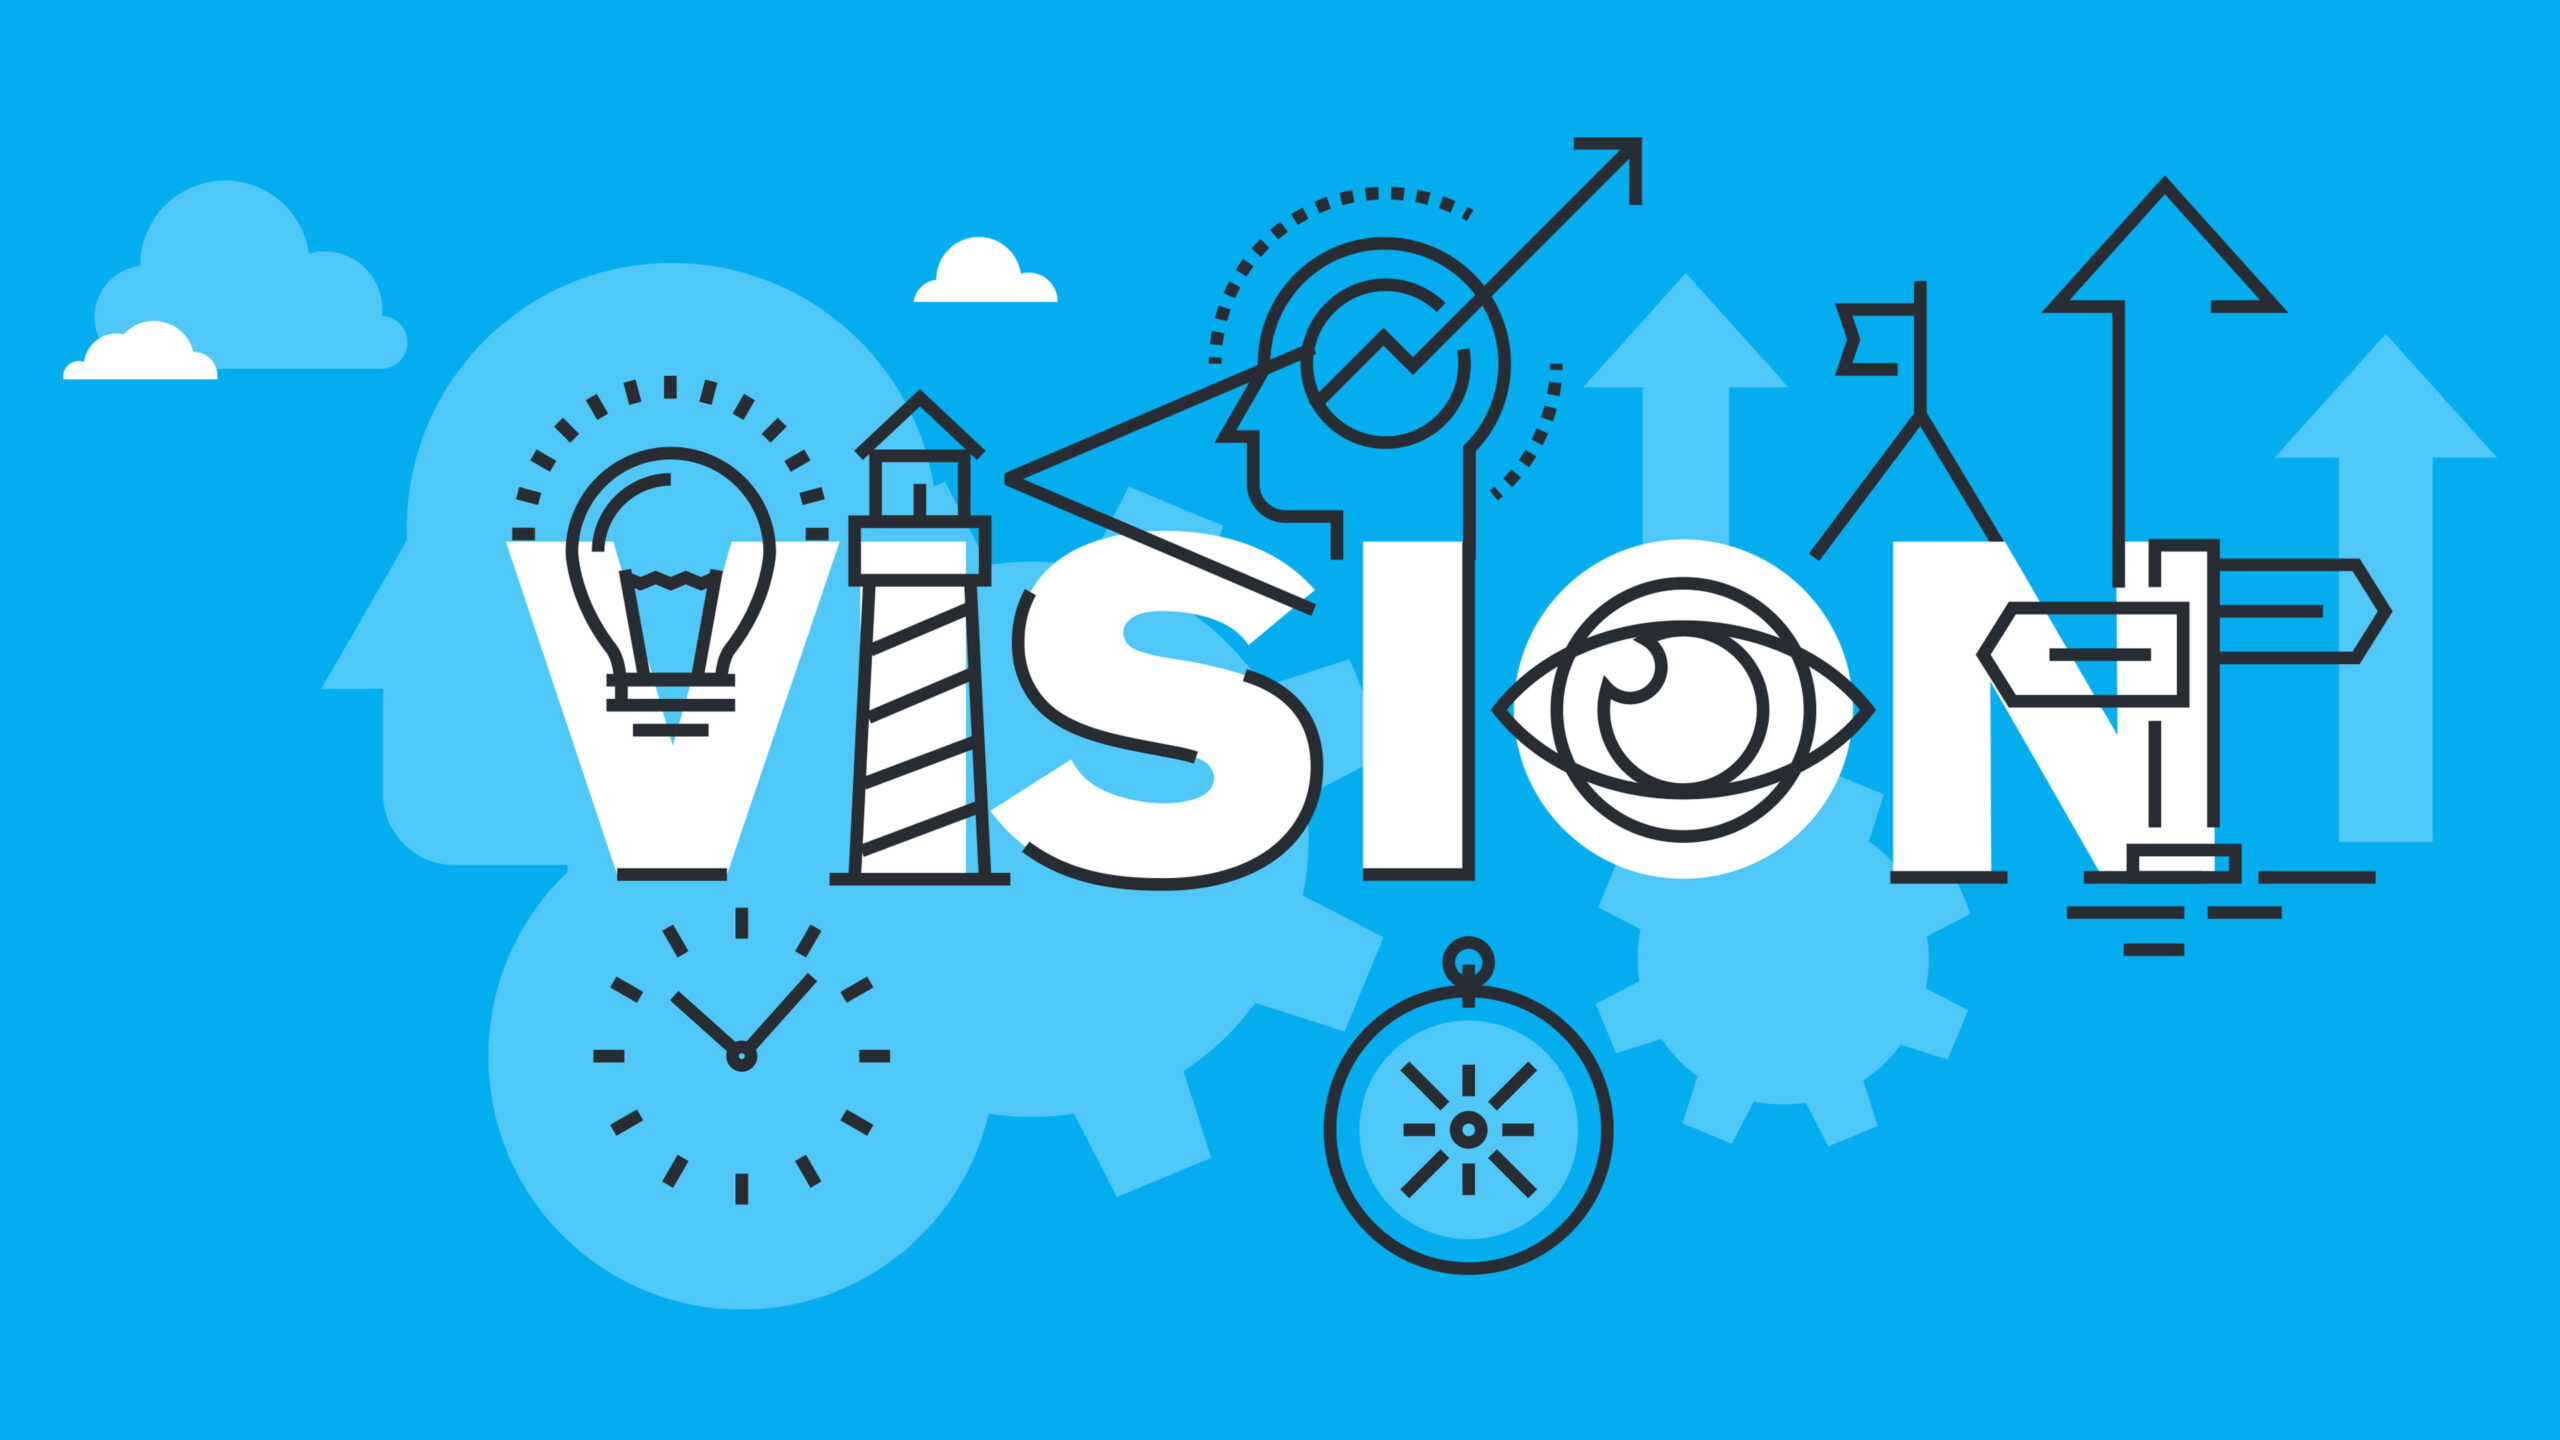 What Is a Vision Statement? 15 Vision Statement Examples to Inspire You